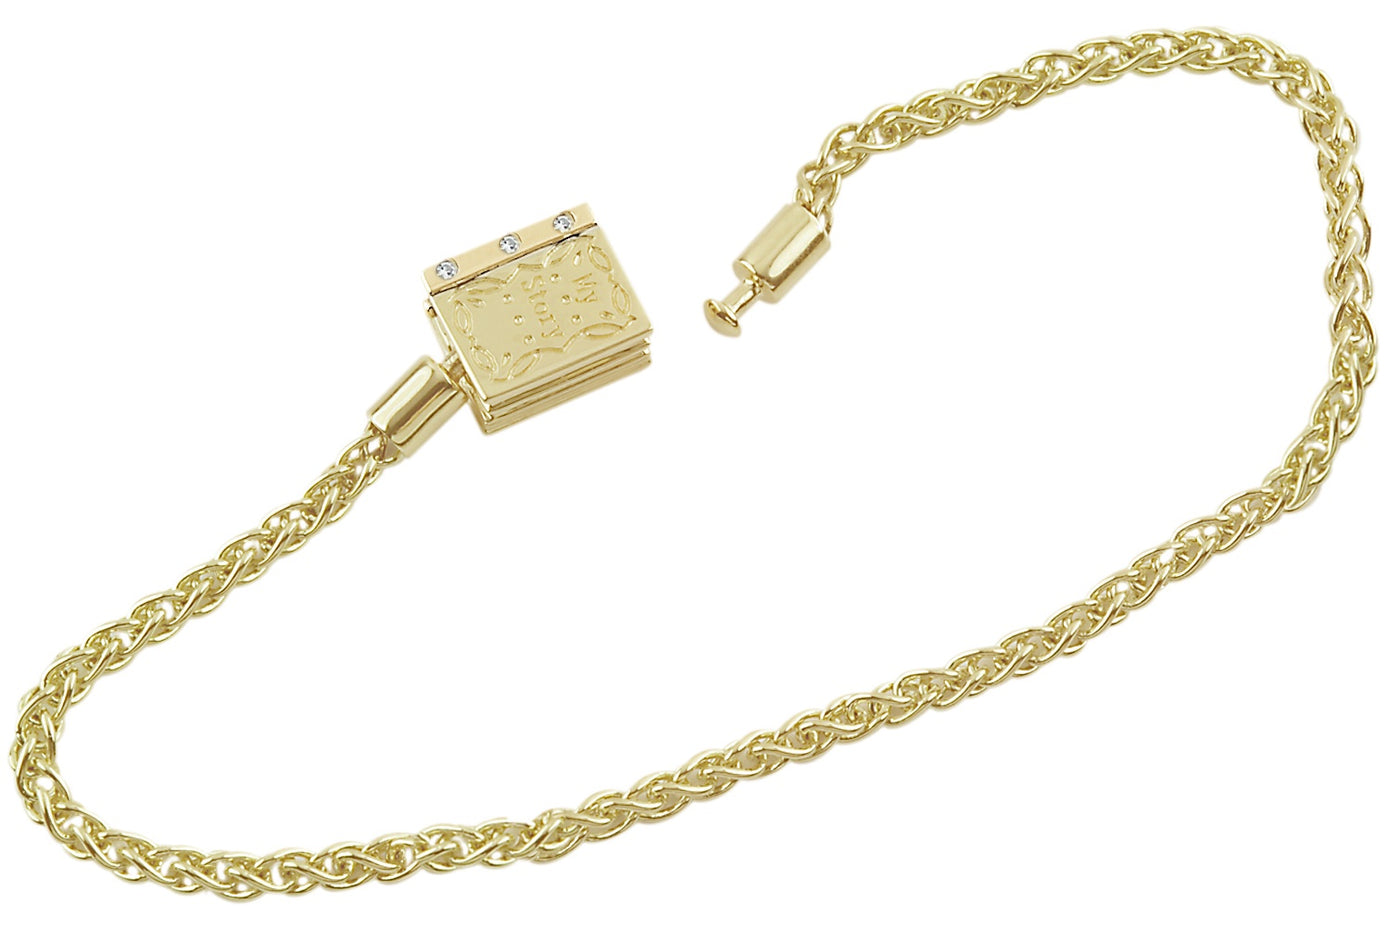 7.25" Bracelet YG - 14K Yellow Gold W/O Stopper Beads and Storywheel Book Clasp with Diamonds